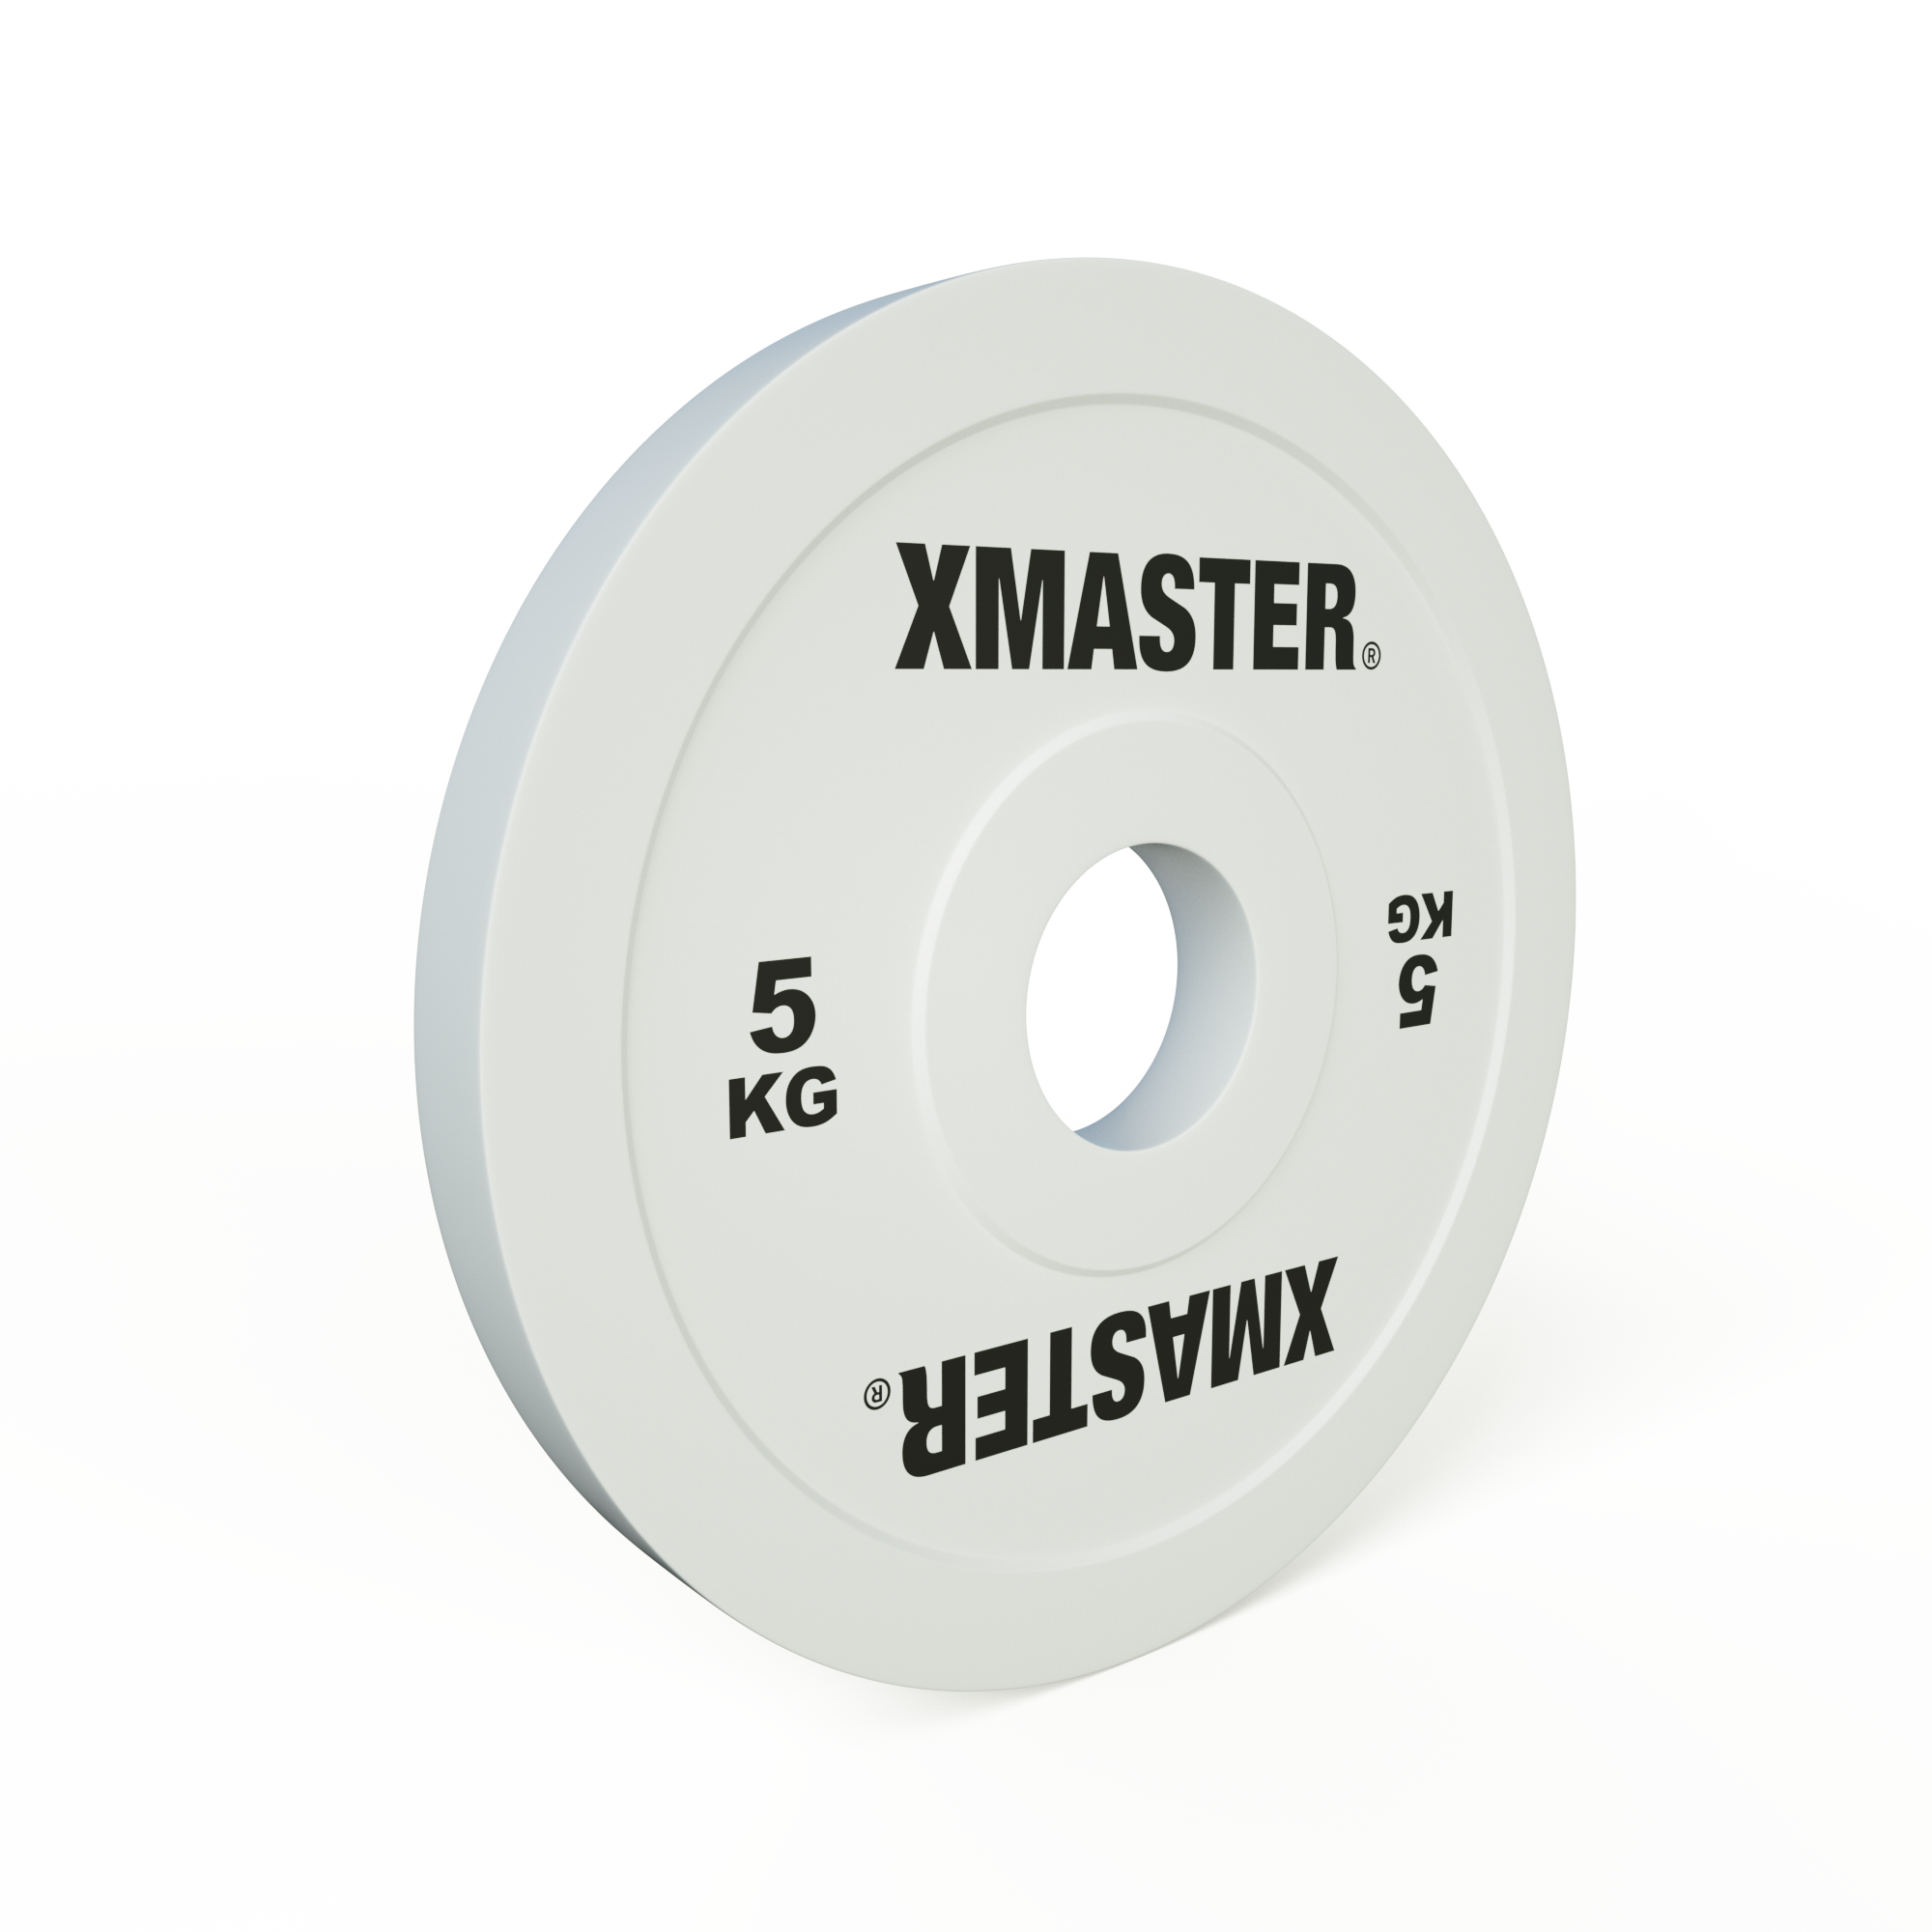 China Xmaster IWF Competition Change Plate manufacturers and ...